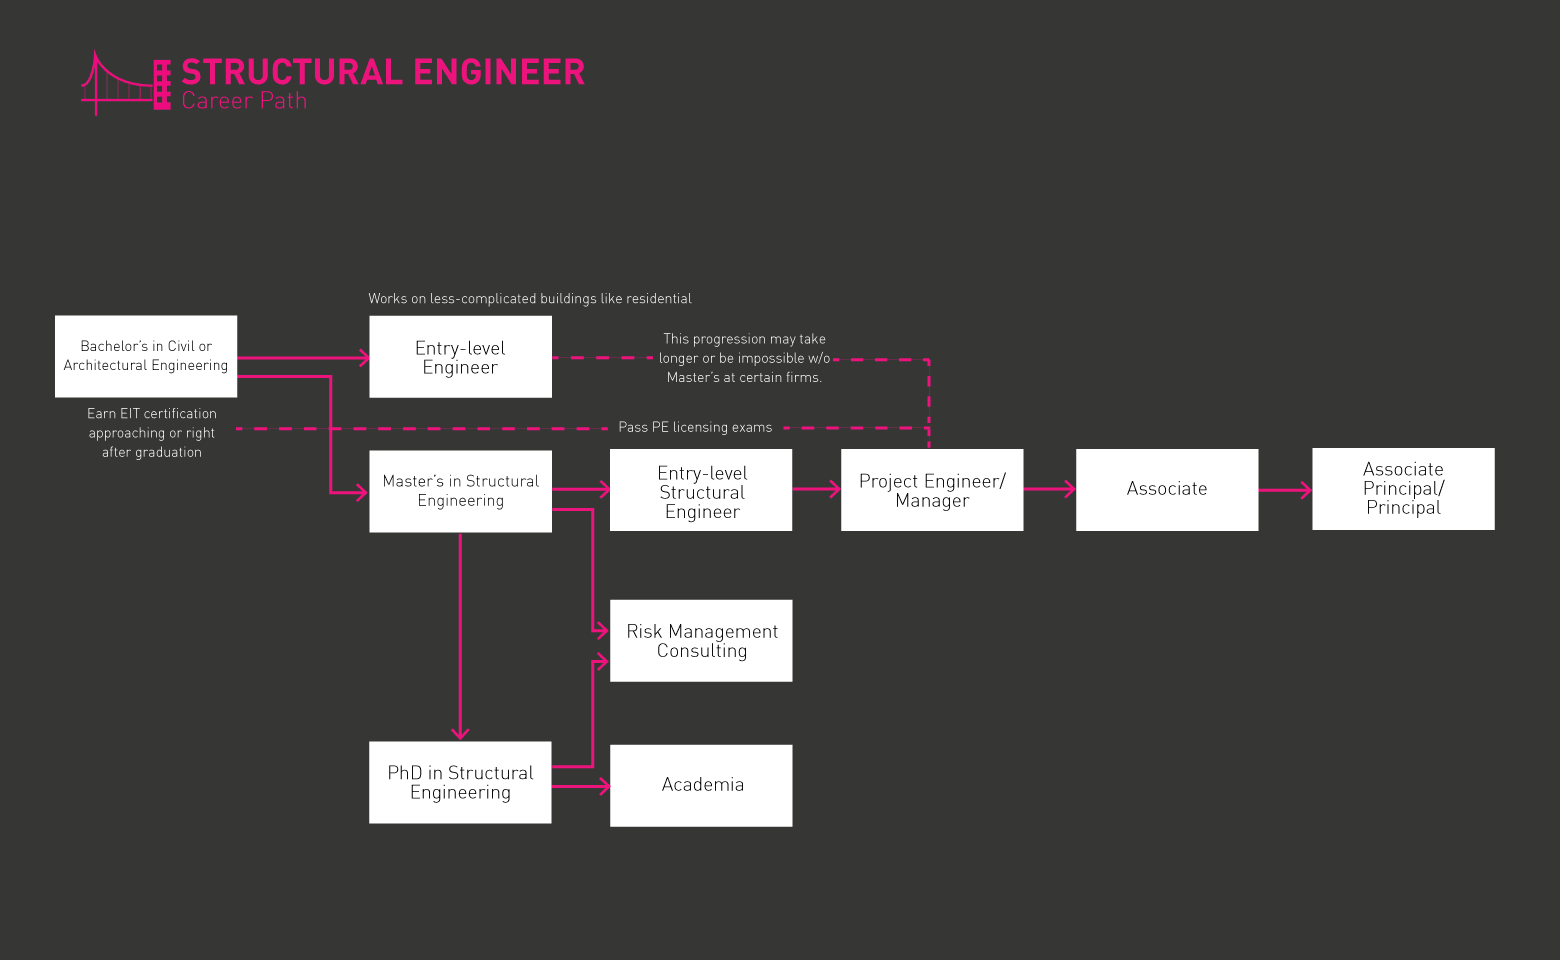 Structural Engineer roadmap gif 